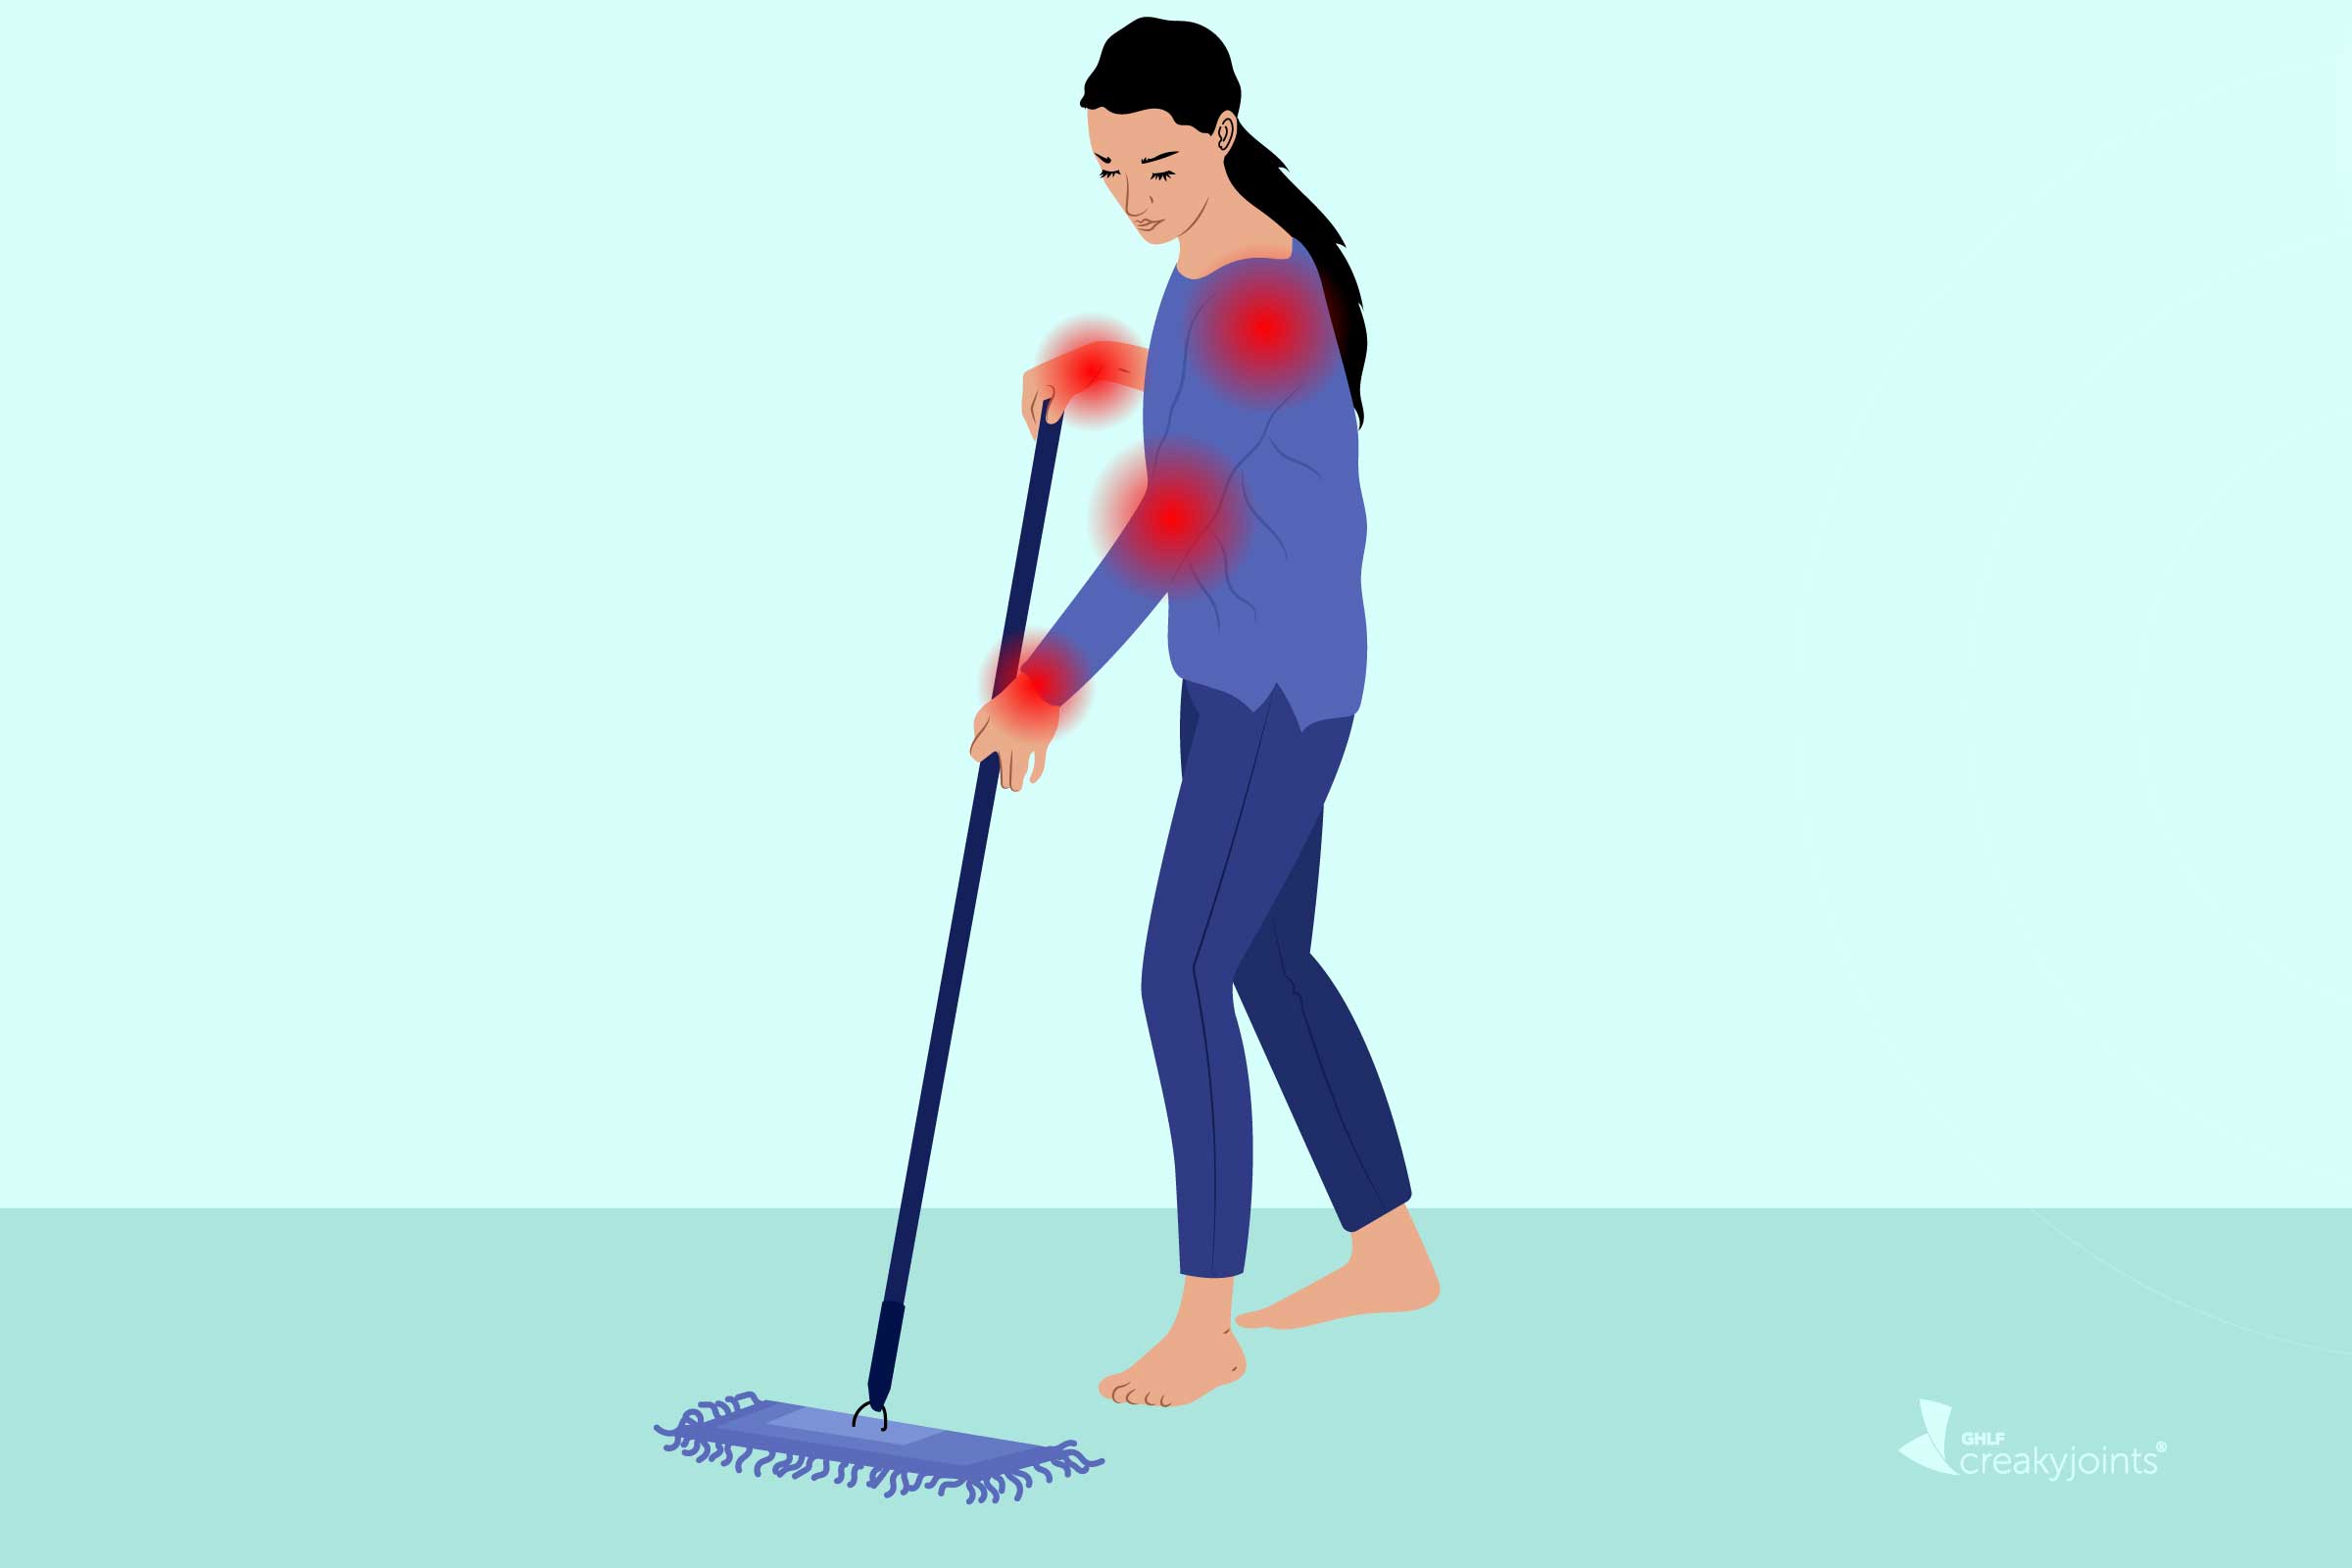 House Cleaning Tools & Tips for Arthritis Sufferers